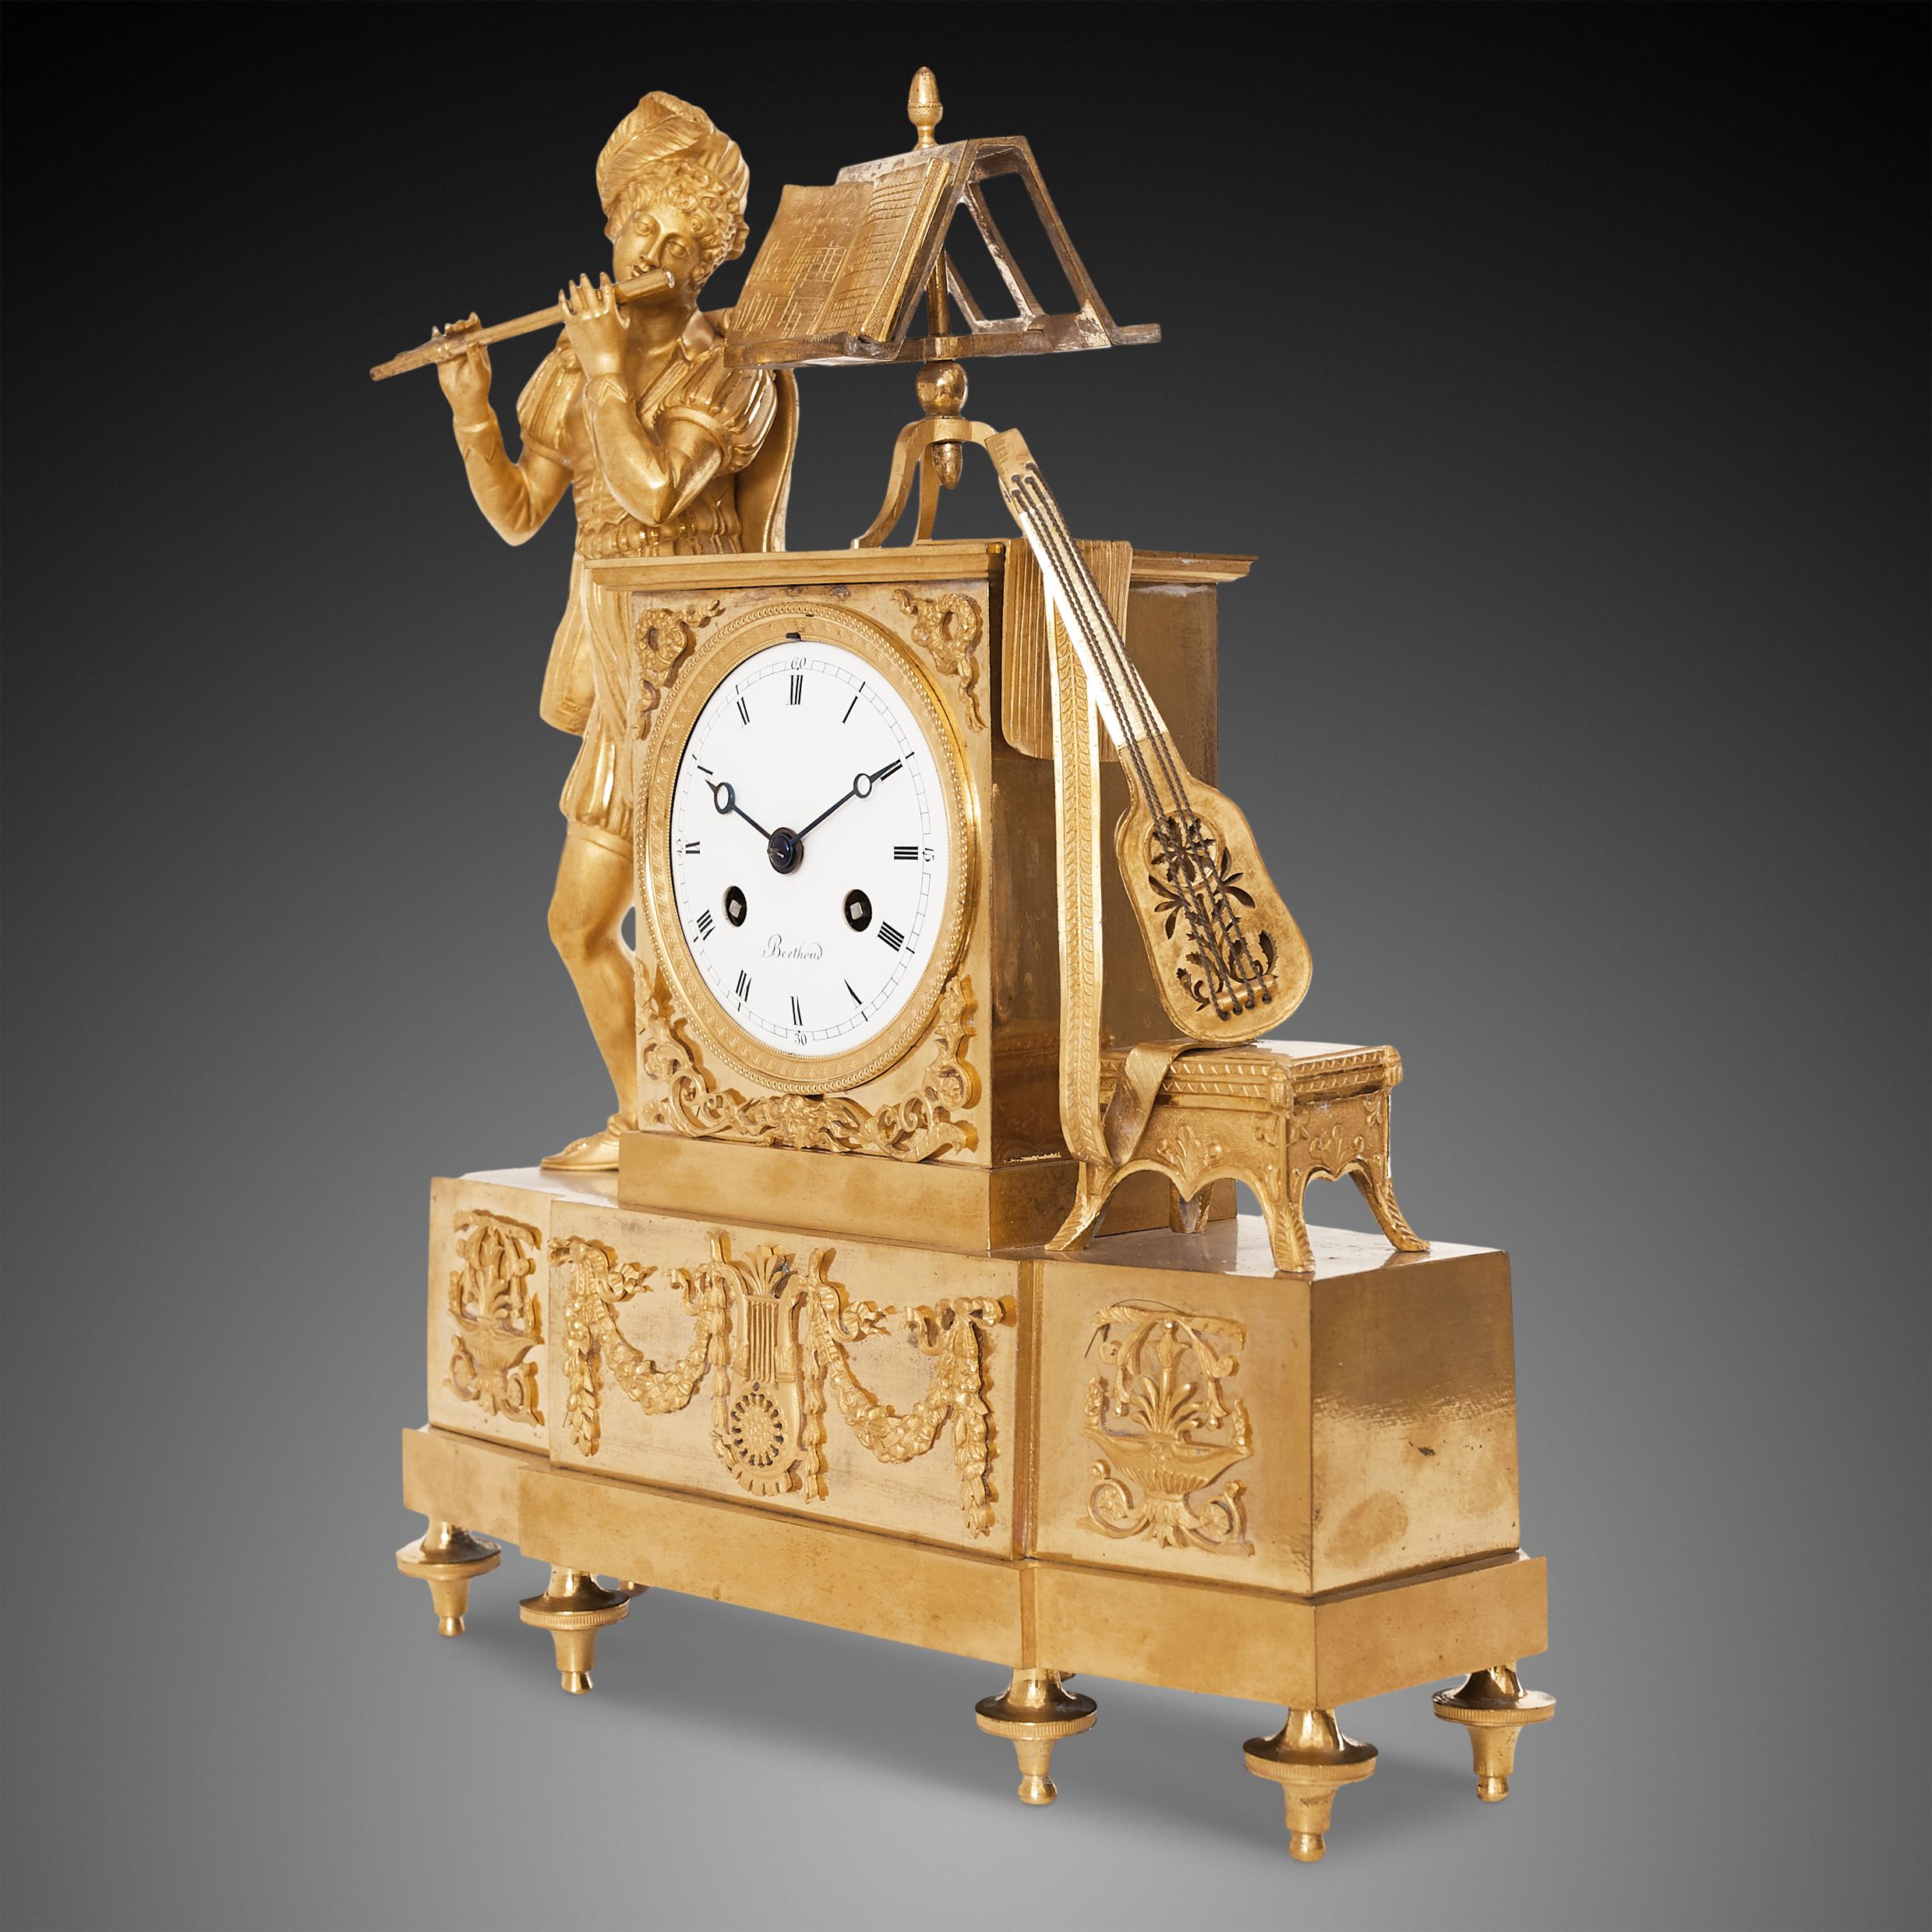 Ormolu bronze mantel clock flanked by a troubadour and musical instruments, signed 'Ferdinand Berthoud a Paris'. 
The end of the 18th and beginning of the 19th century was a crucial time in which new technological advances helped to make watches